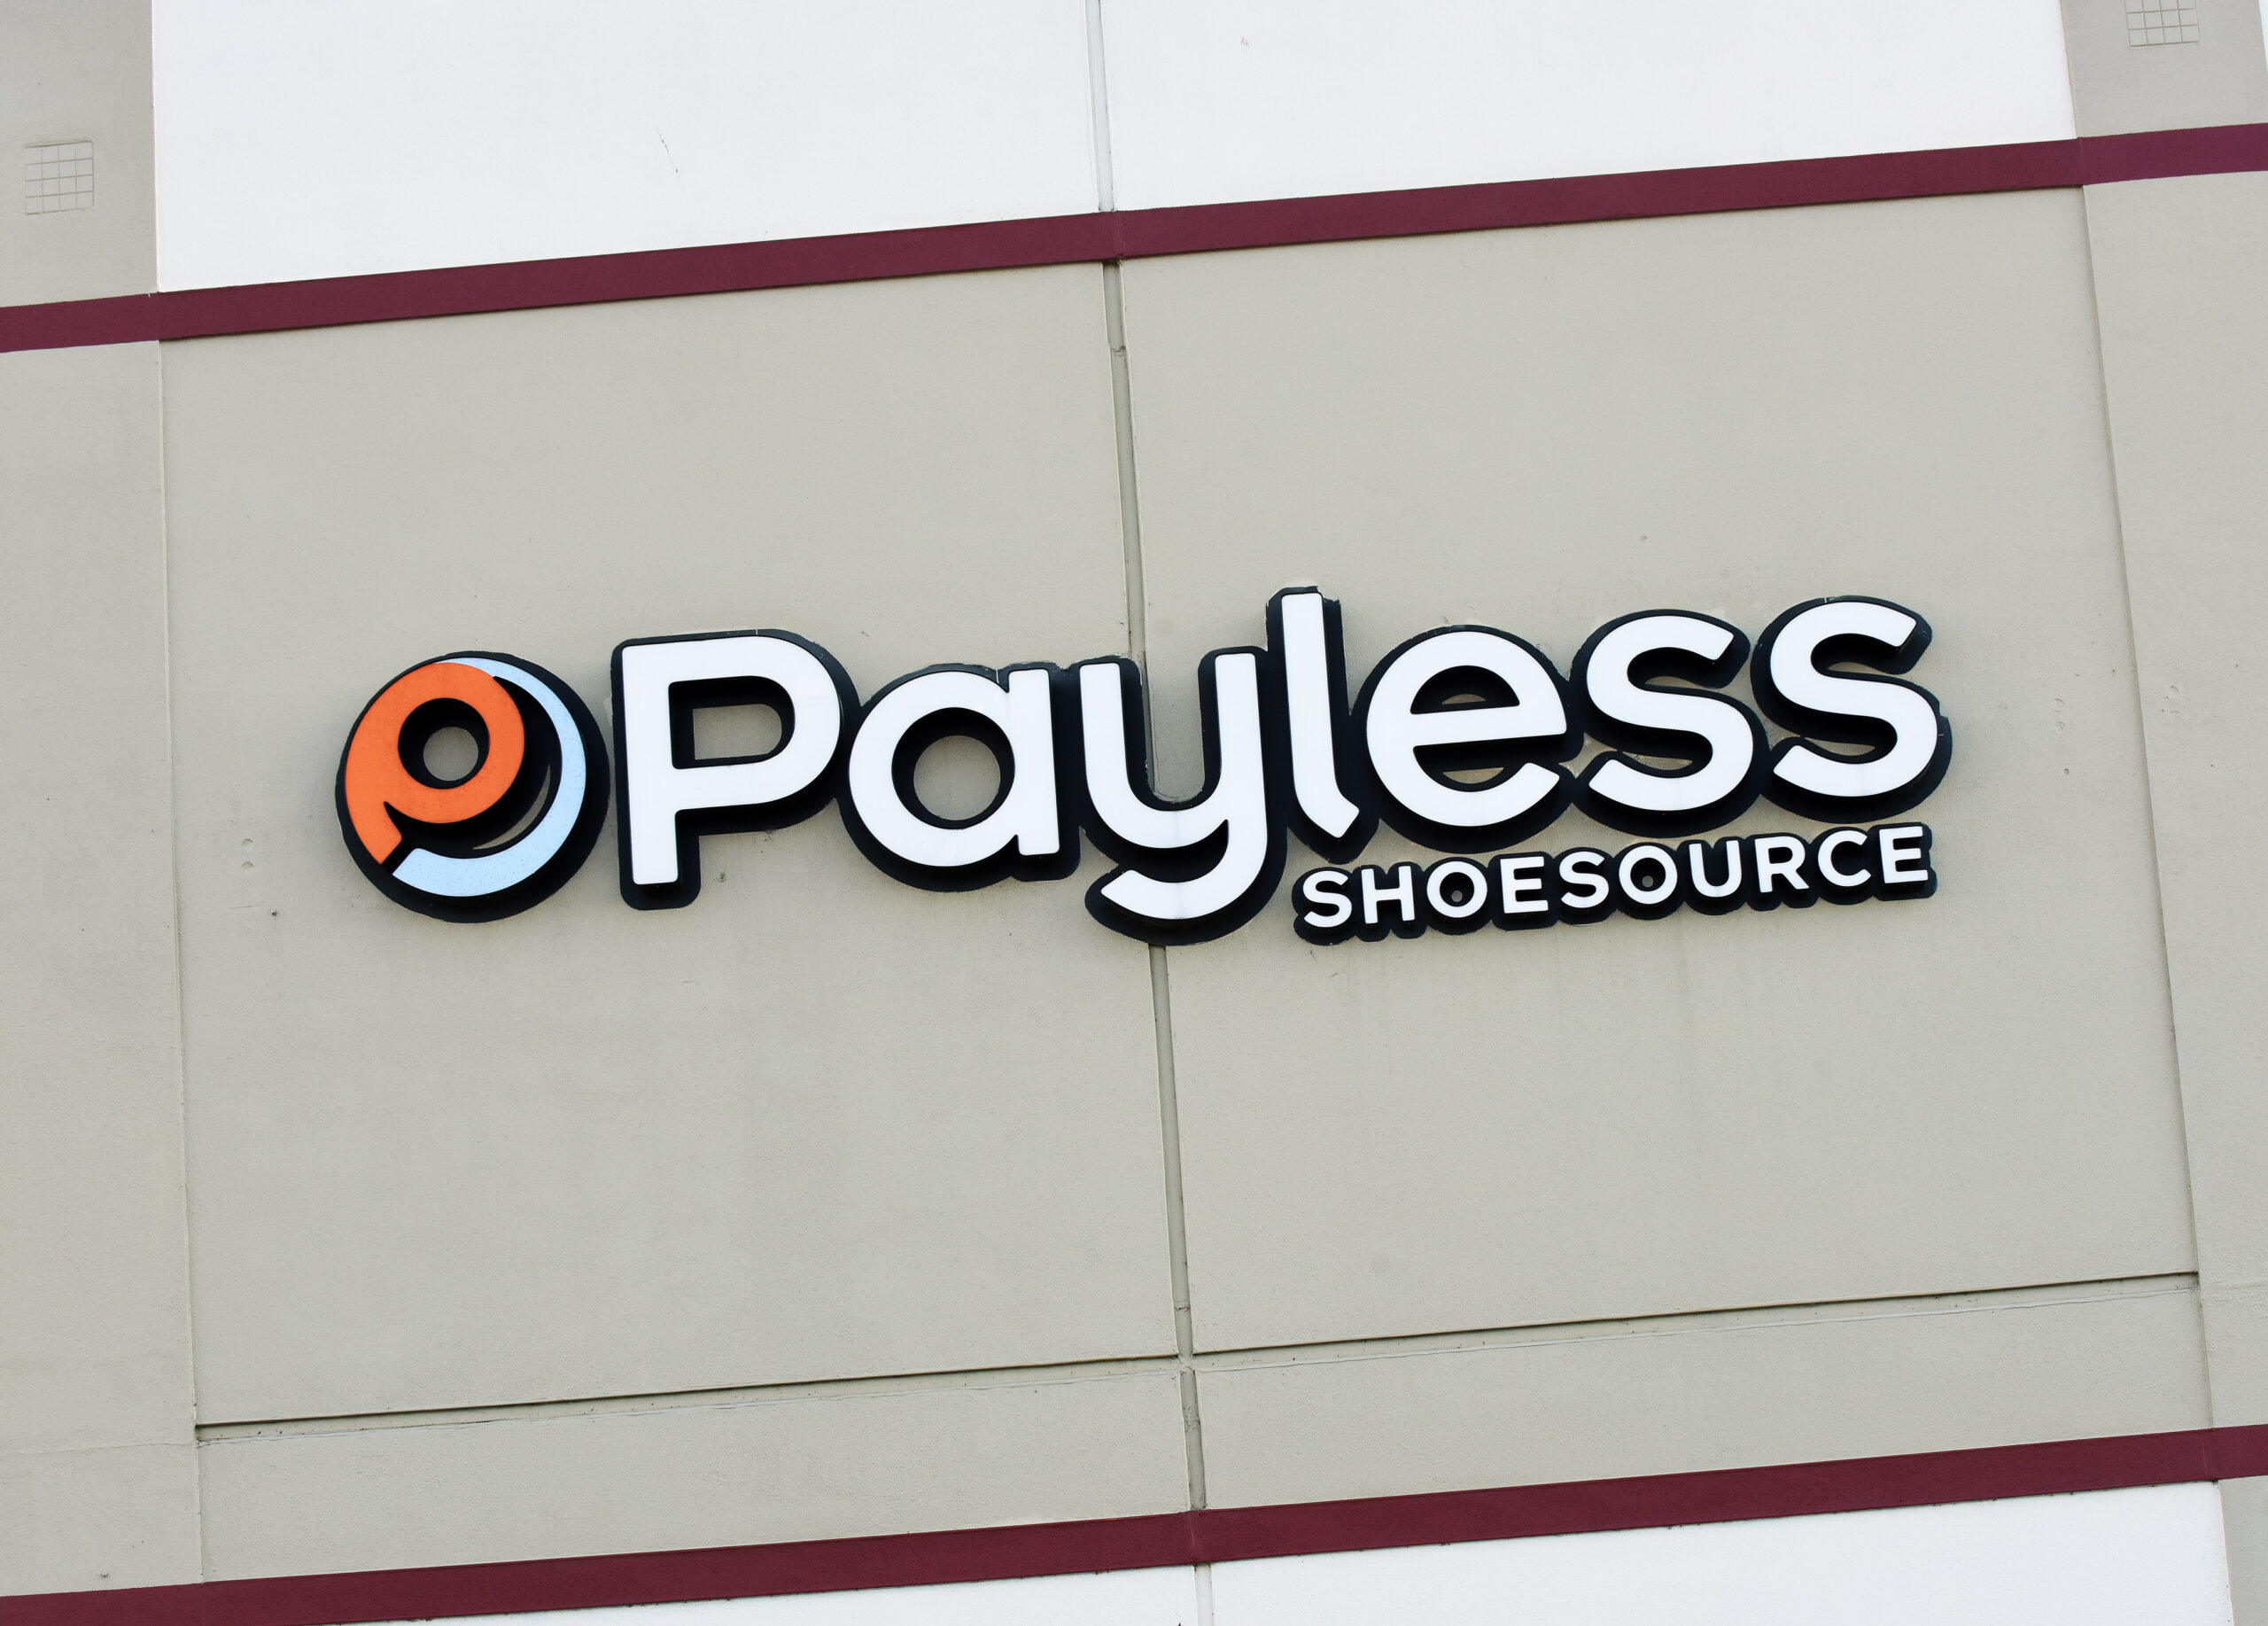 February 17, 2019 - Orlando, Florida, United States - A Payless ShoeSource store is seen in Orlando, Florida on February 17, 2019, the first day of the firm's liquidation sale after confirming on February 15, 2019 that it will close its 2,100 stores in the U.S. and Puerto Rico. The company filed bankruptcy in 2017 and closed 673 stores.